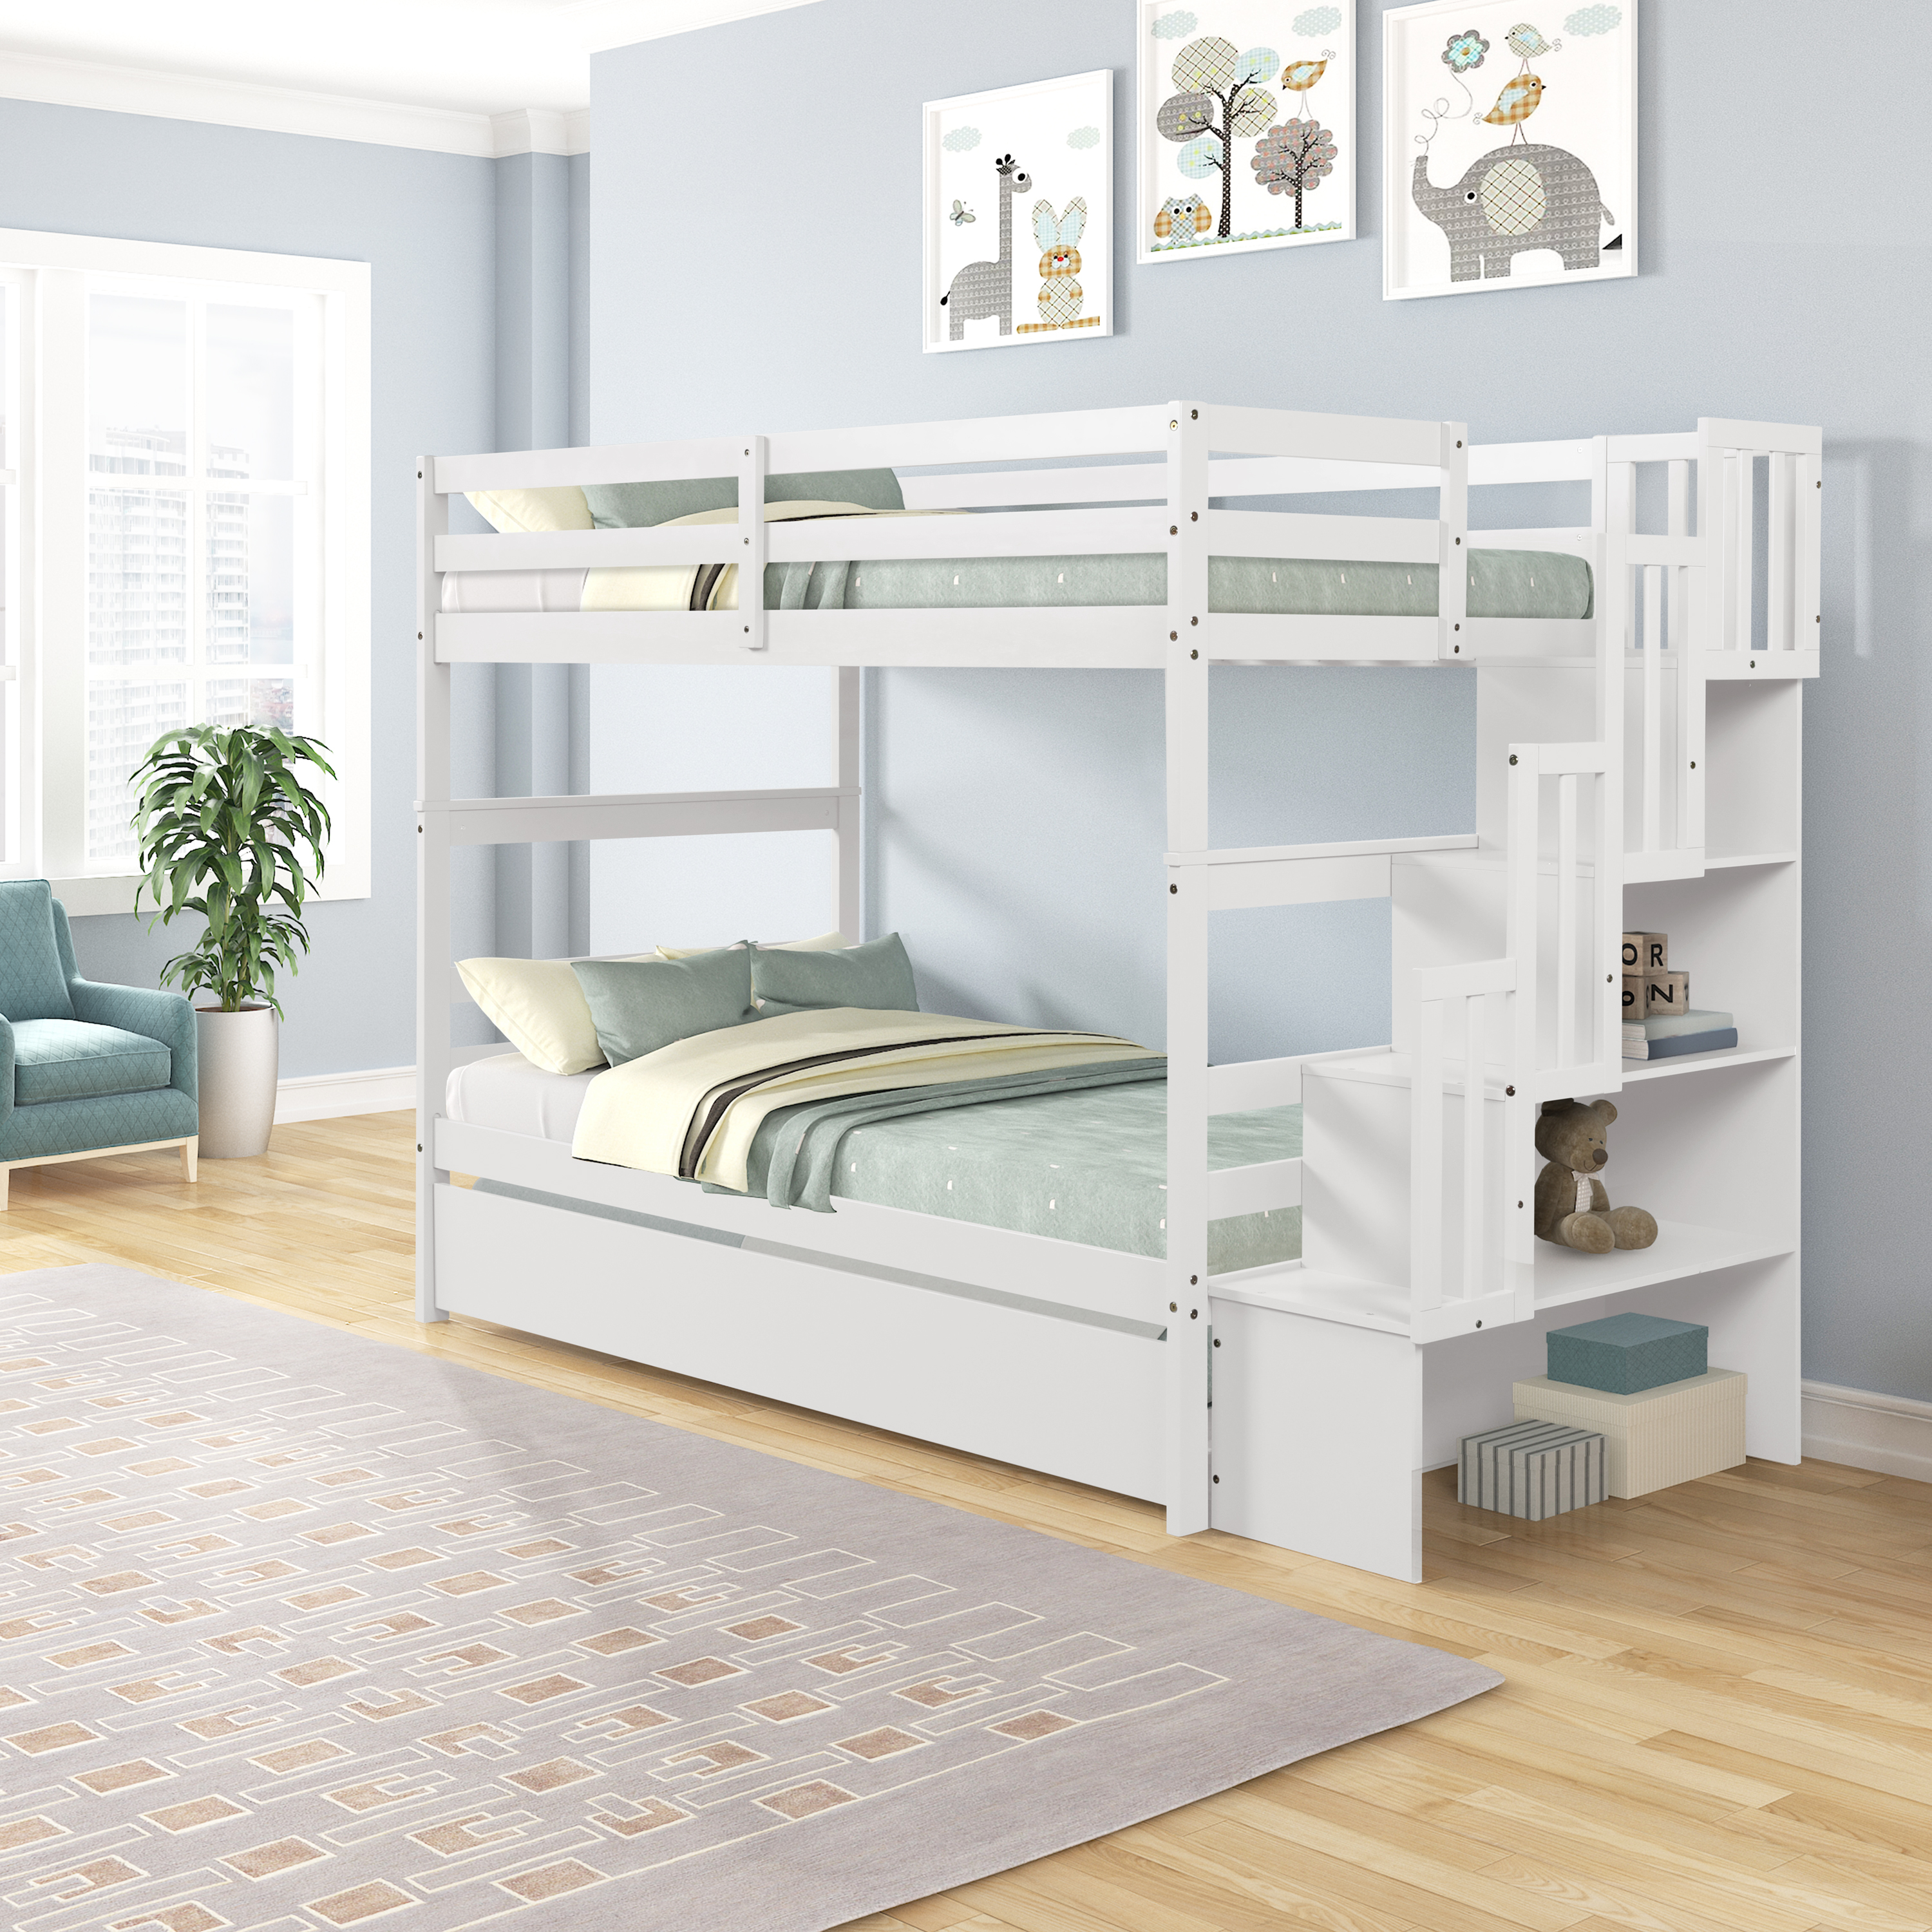 TWIN BUNKBED WITH TRUNDLE-Boyel Living